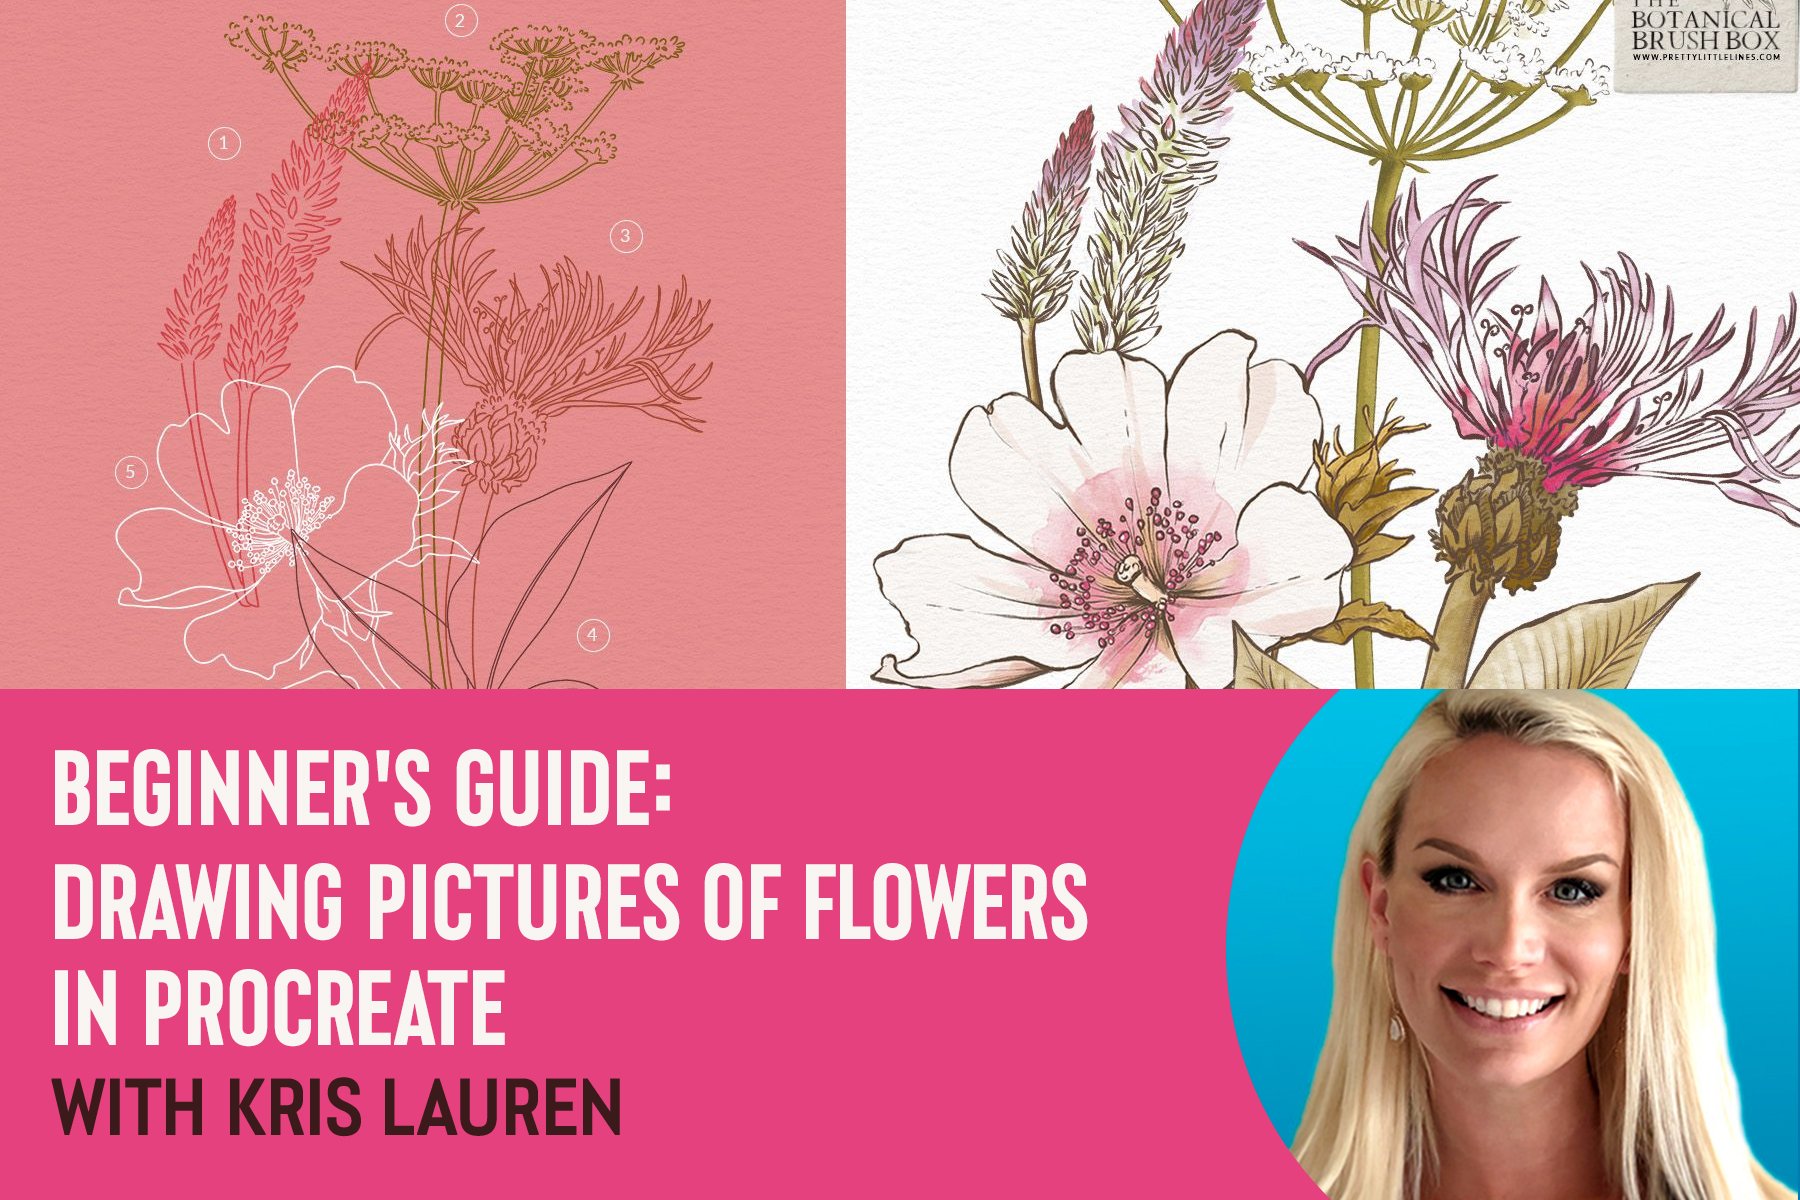 Beginner's Guide: Drawing Pictures of Flowers in Procreate With Kris Lauren